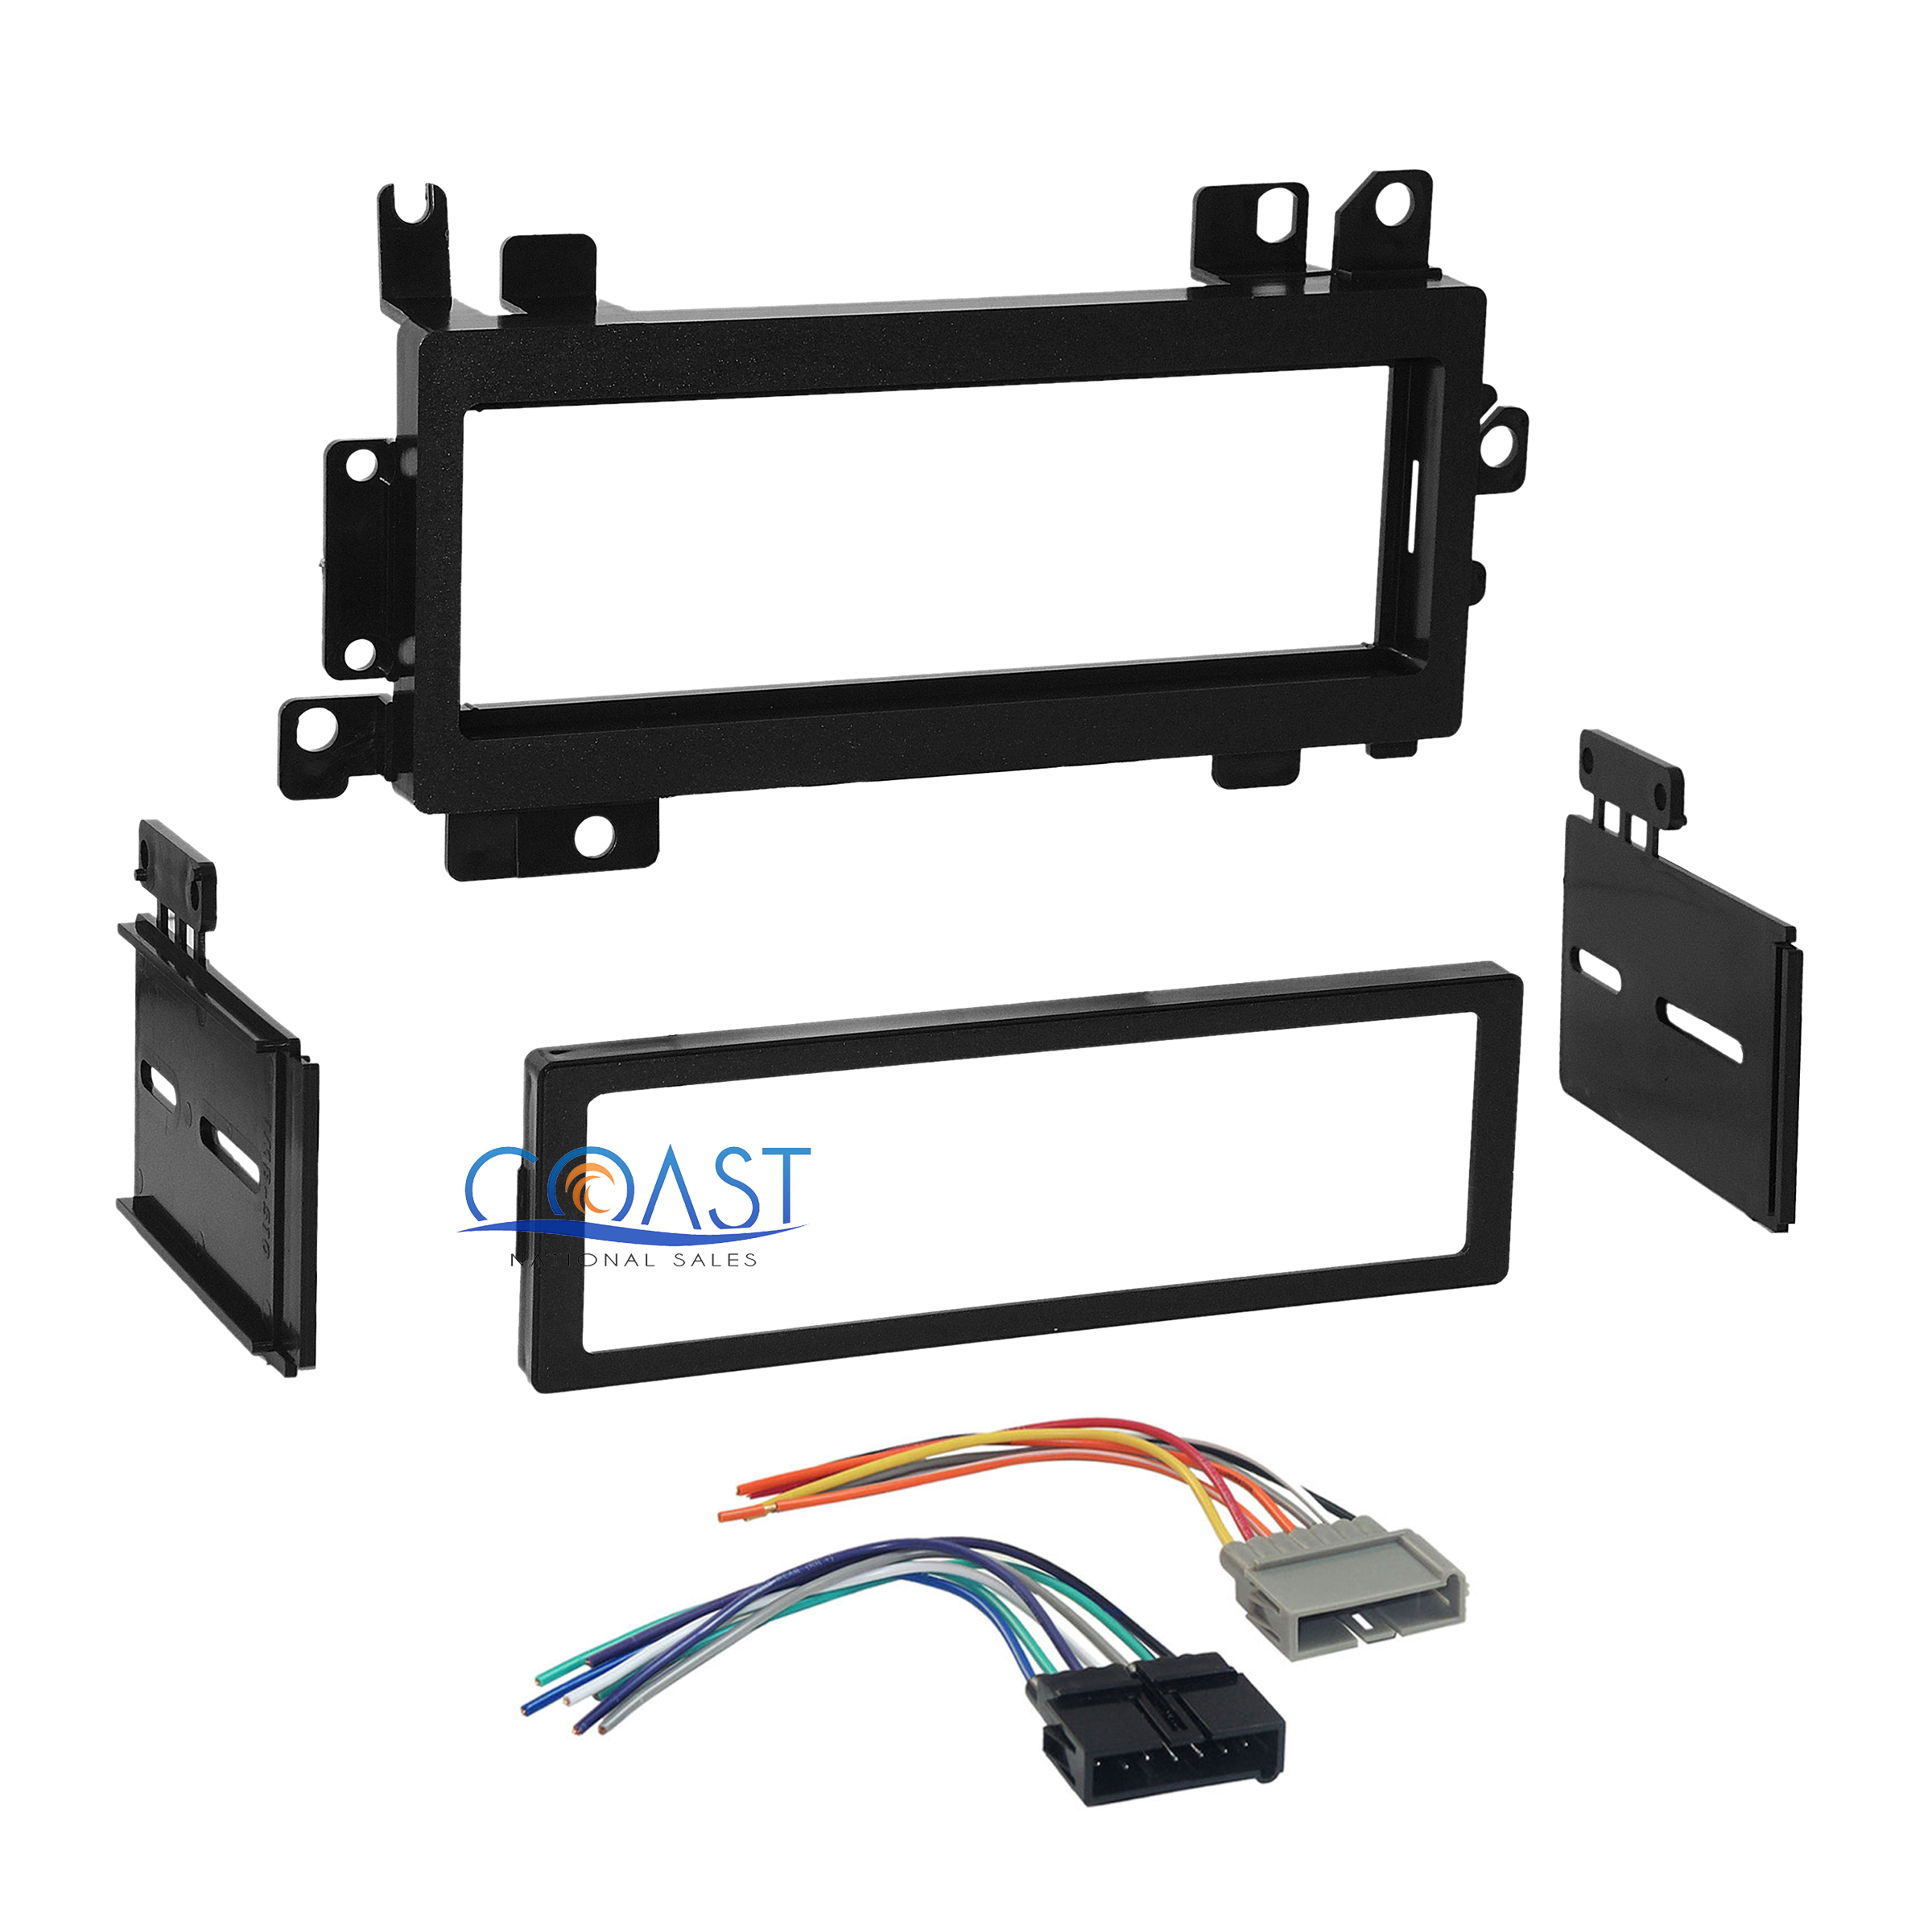 Harness for 1974-2001 Dodge Ford Lincoln Jeep Single DIN Car Stereo Dash Kit